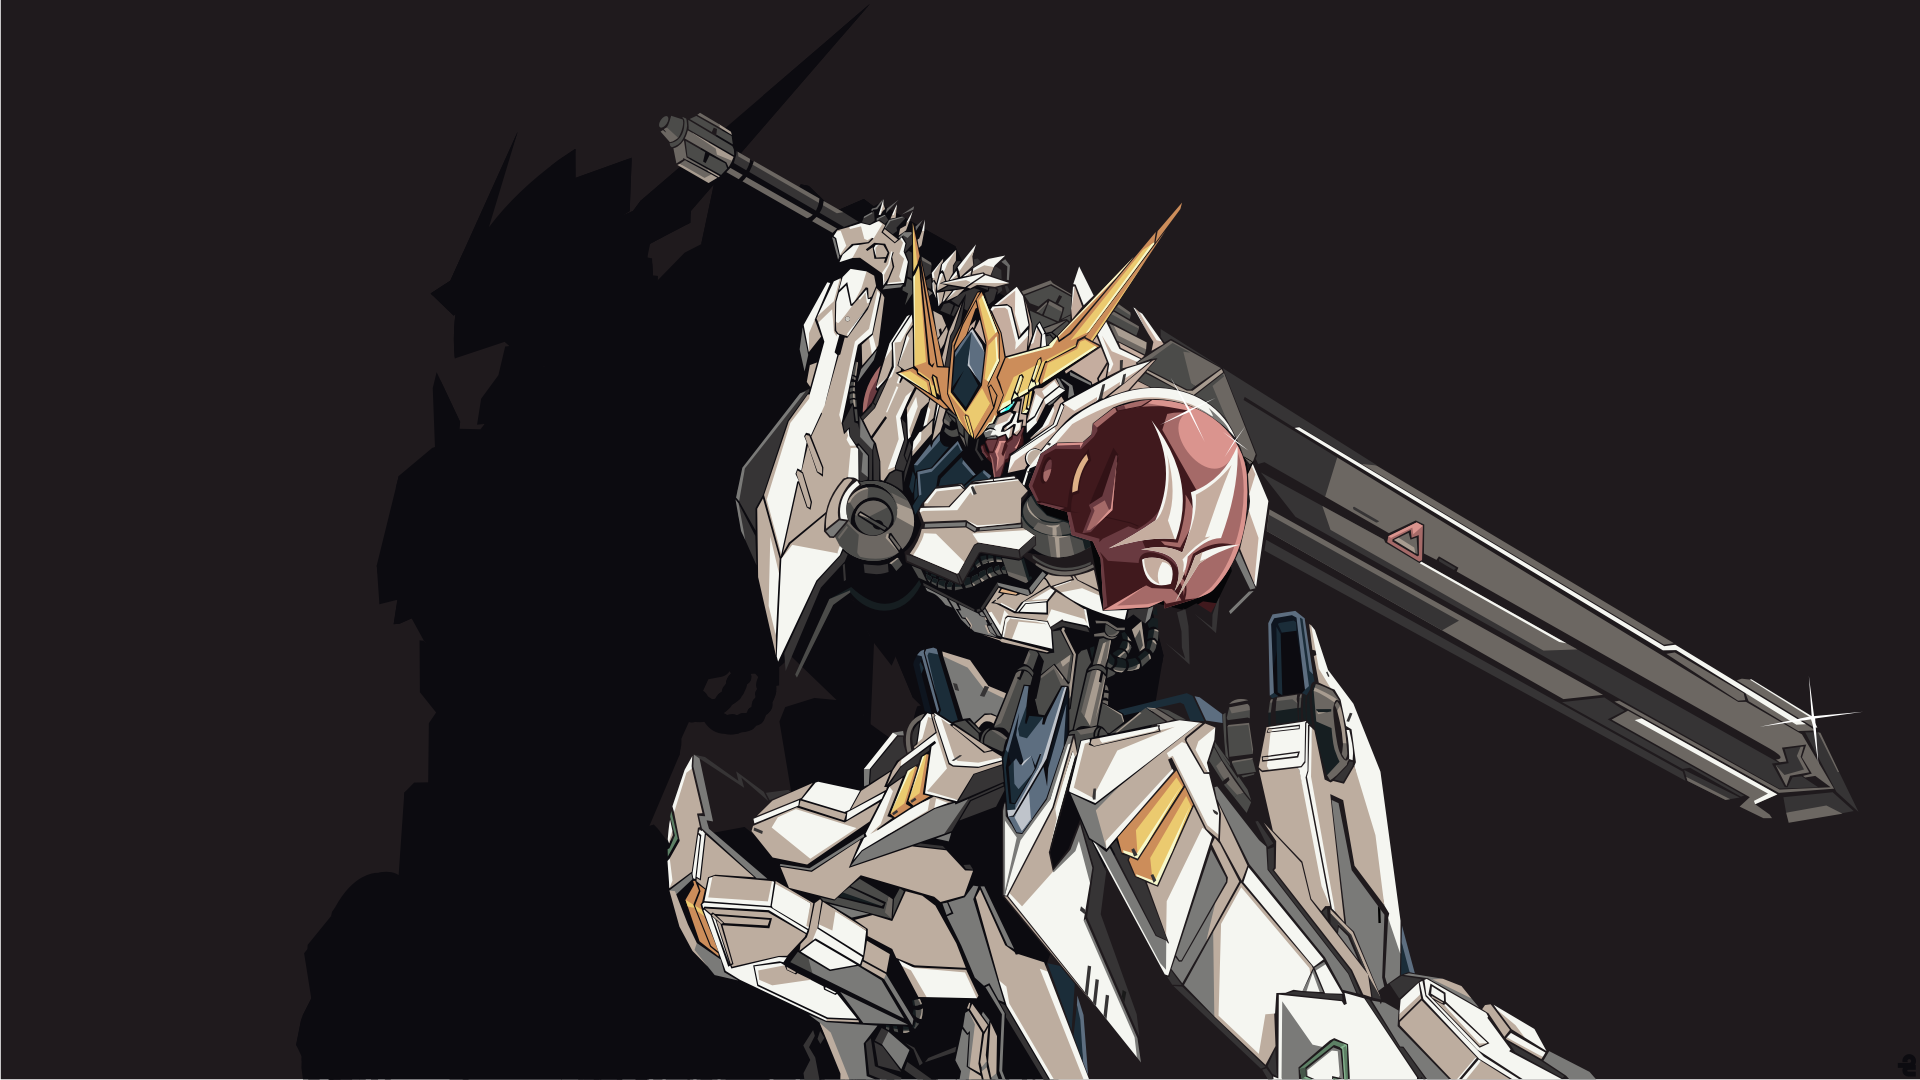 Mobile Suit Gundam Iron Blooded Orphans Mobile Suit Gundam Tekkadan Gundam ASW G 08 Gundam Barbatos  1920x1080